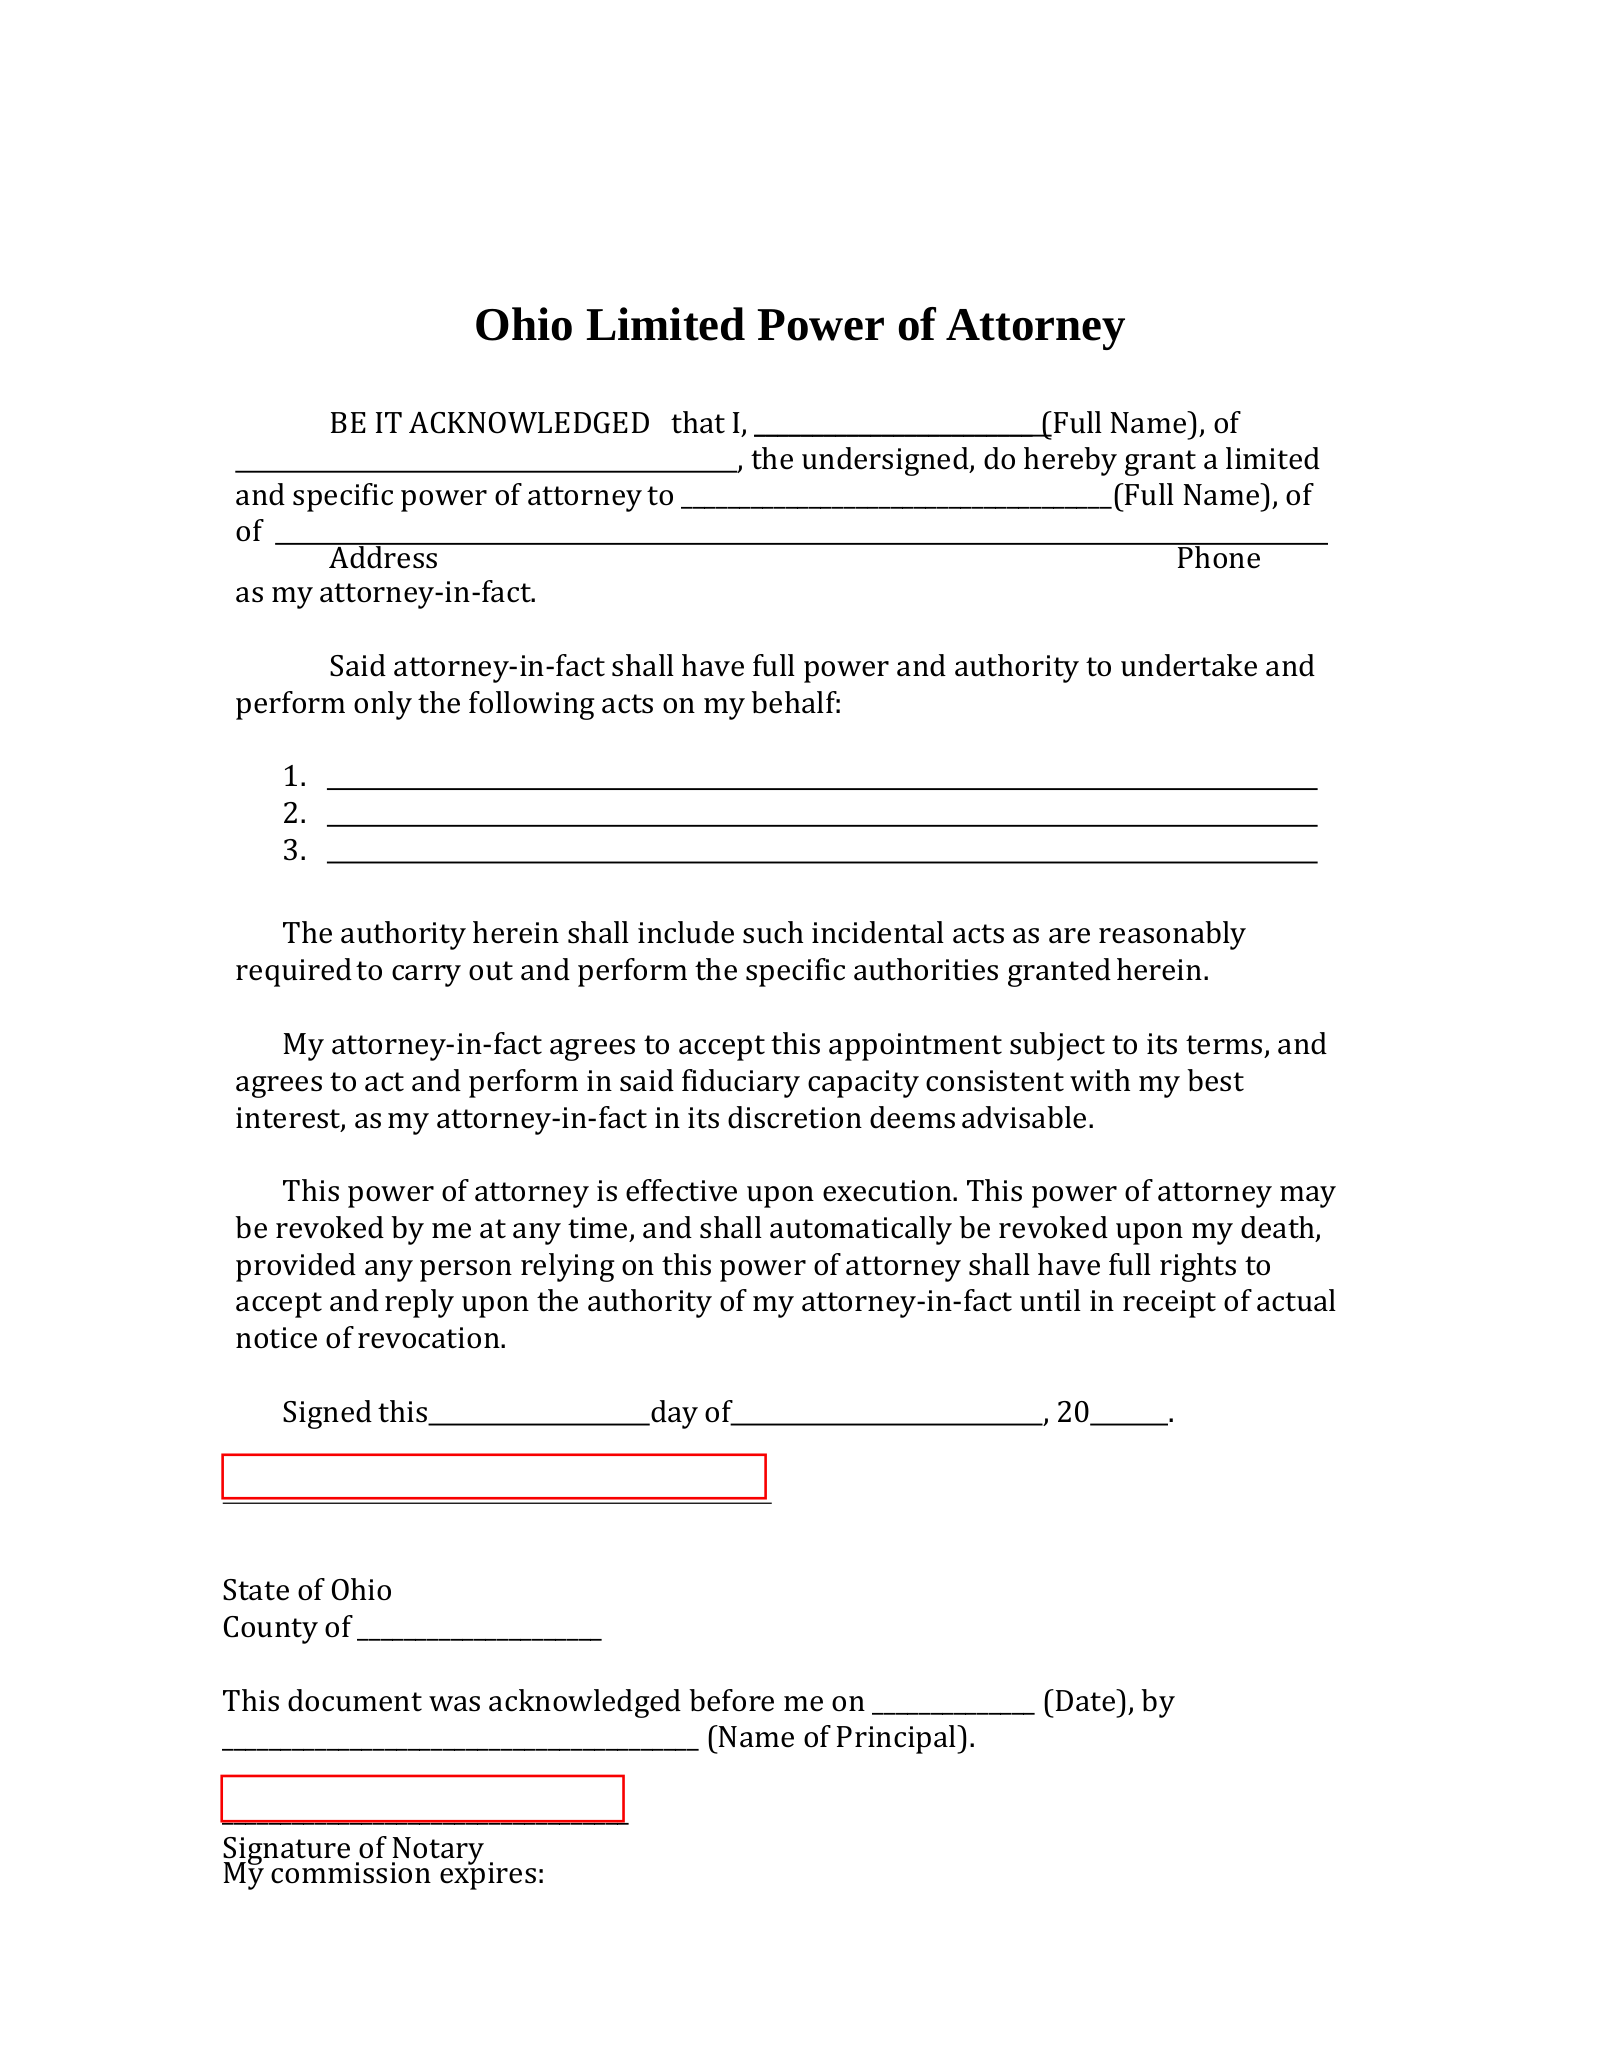 Ohio Limited Power of Attorney Form